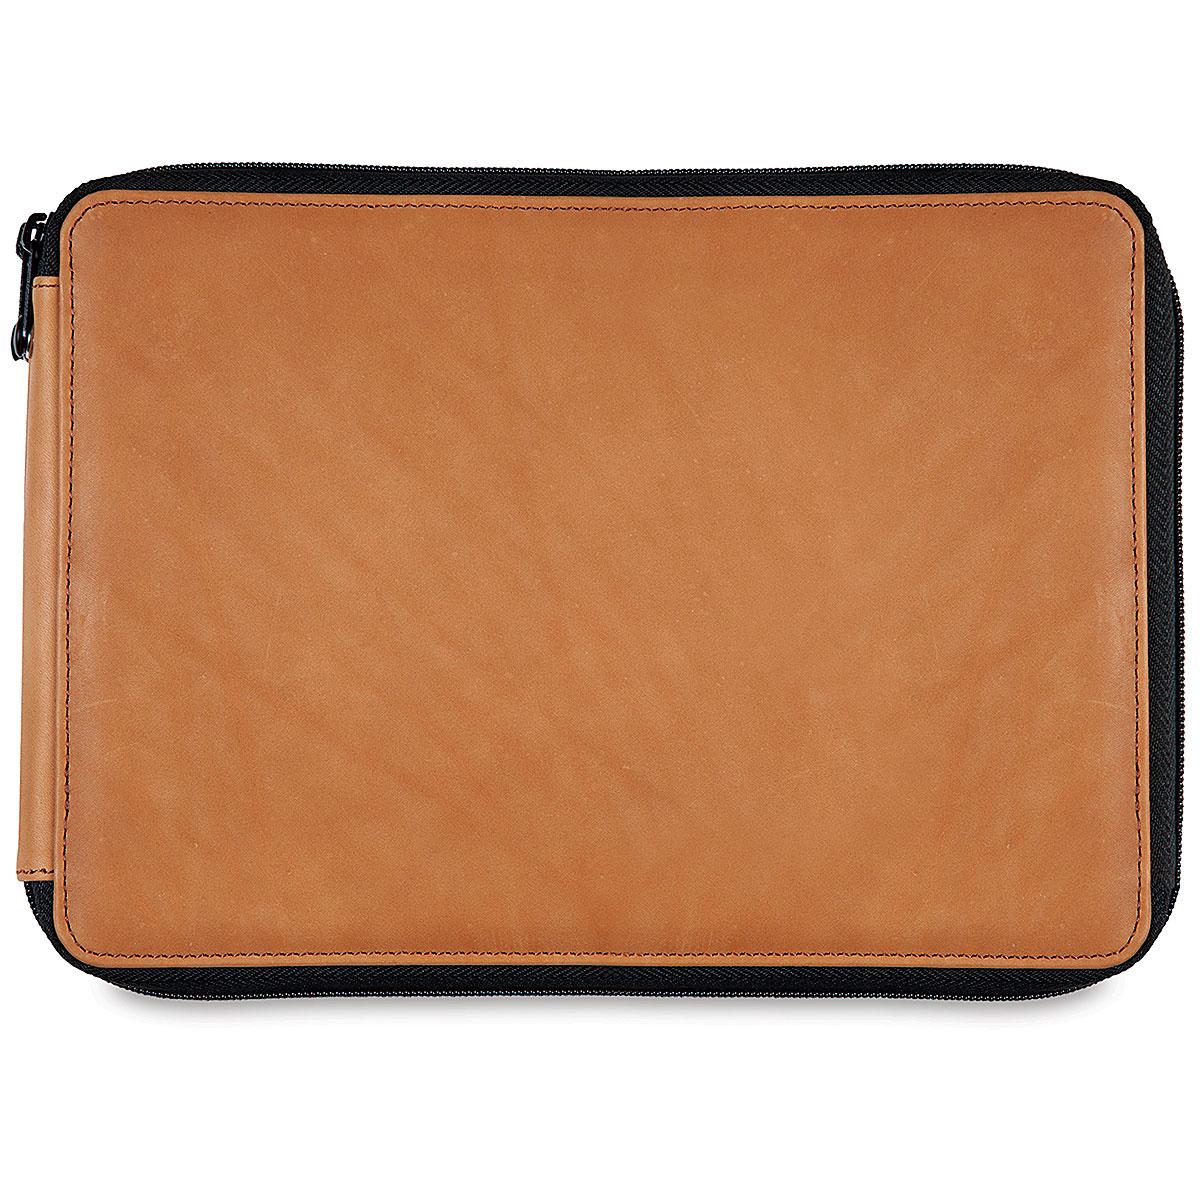 Global Classic Leather Pencil Case - Saddle Brown, for 120 Pencils ...